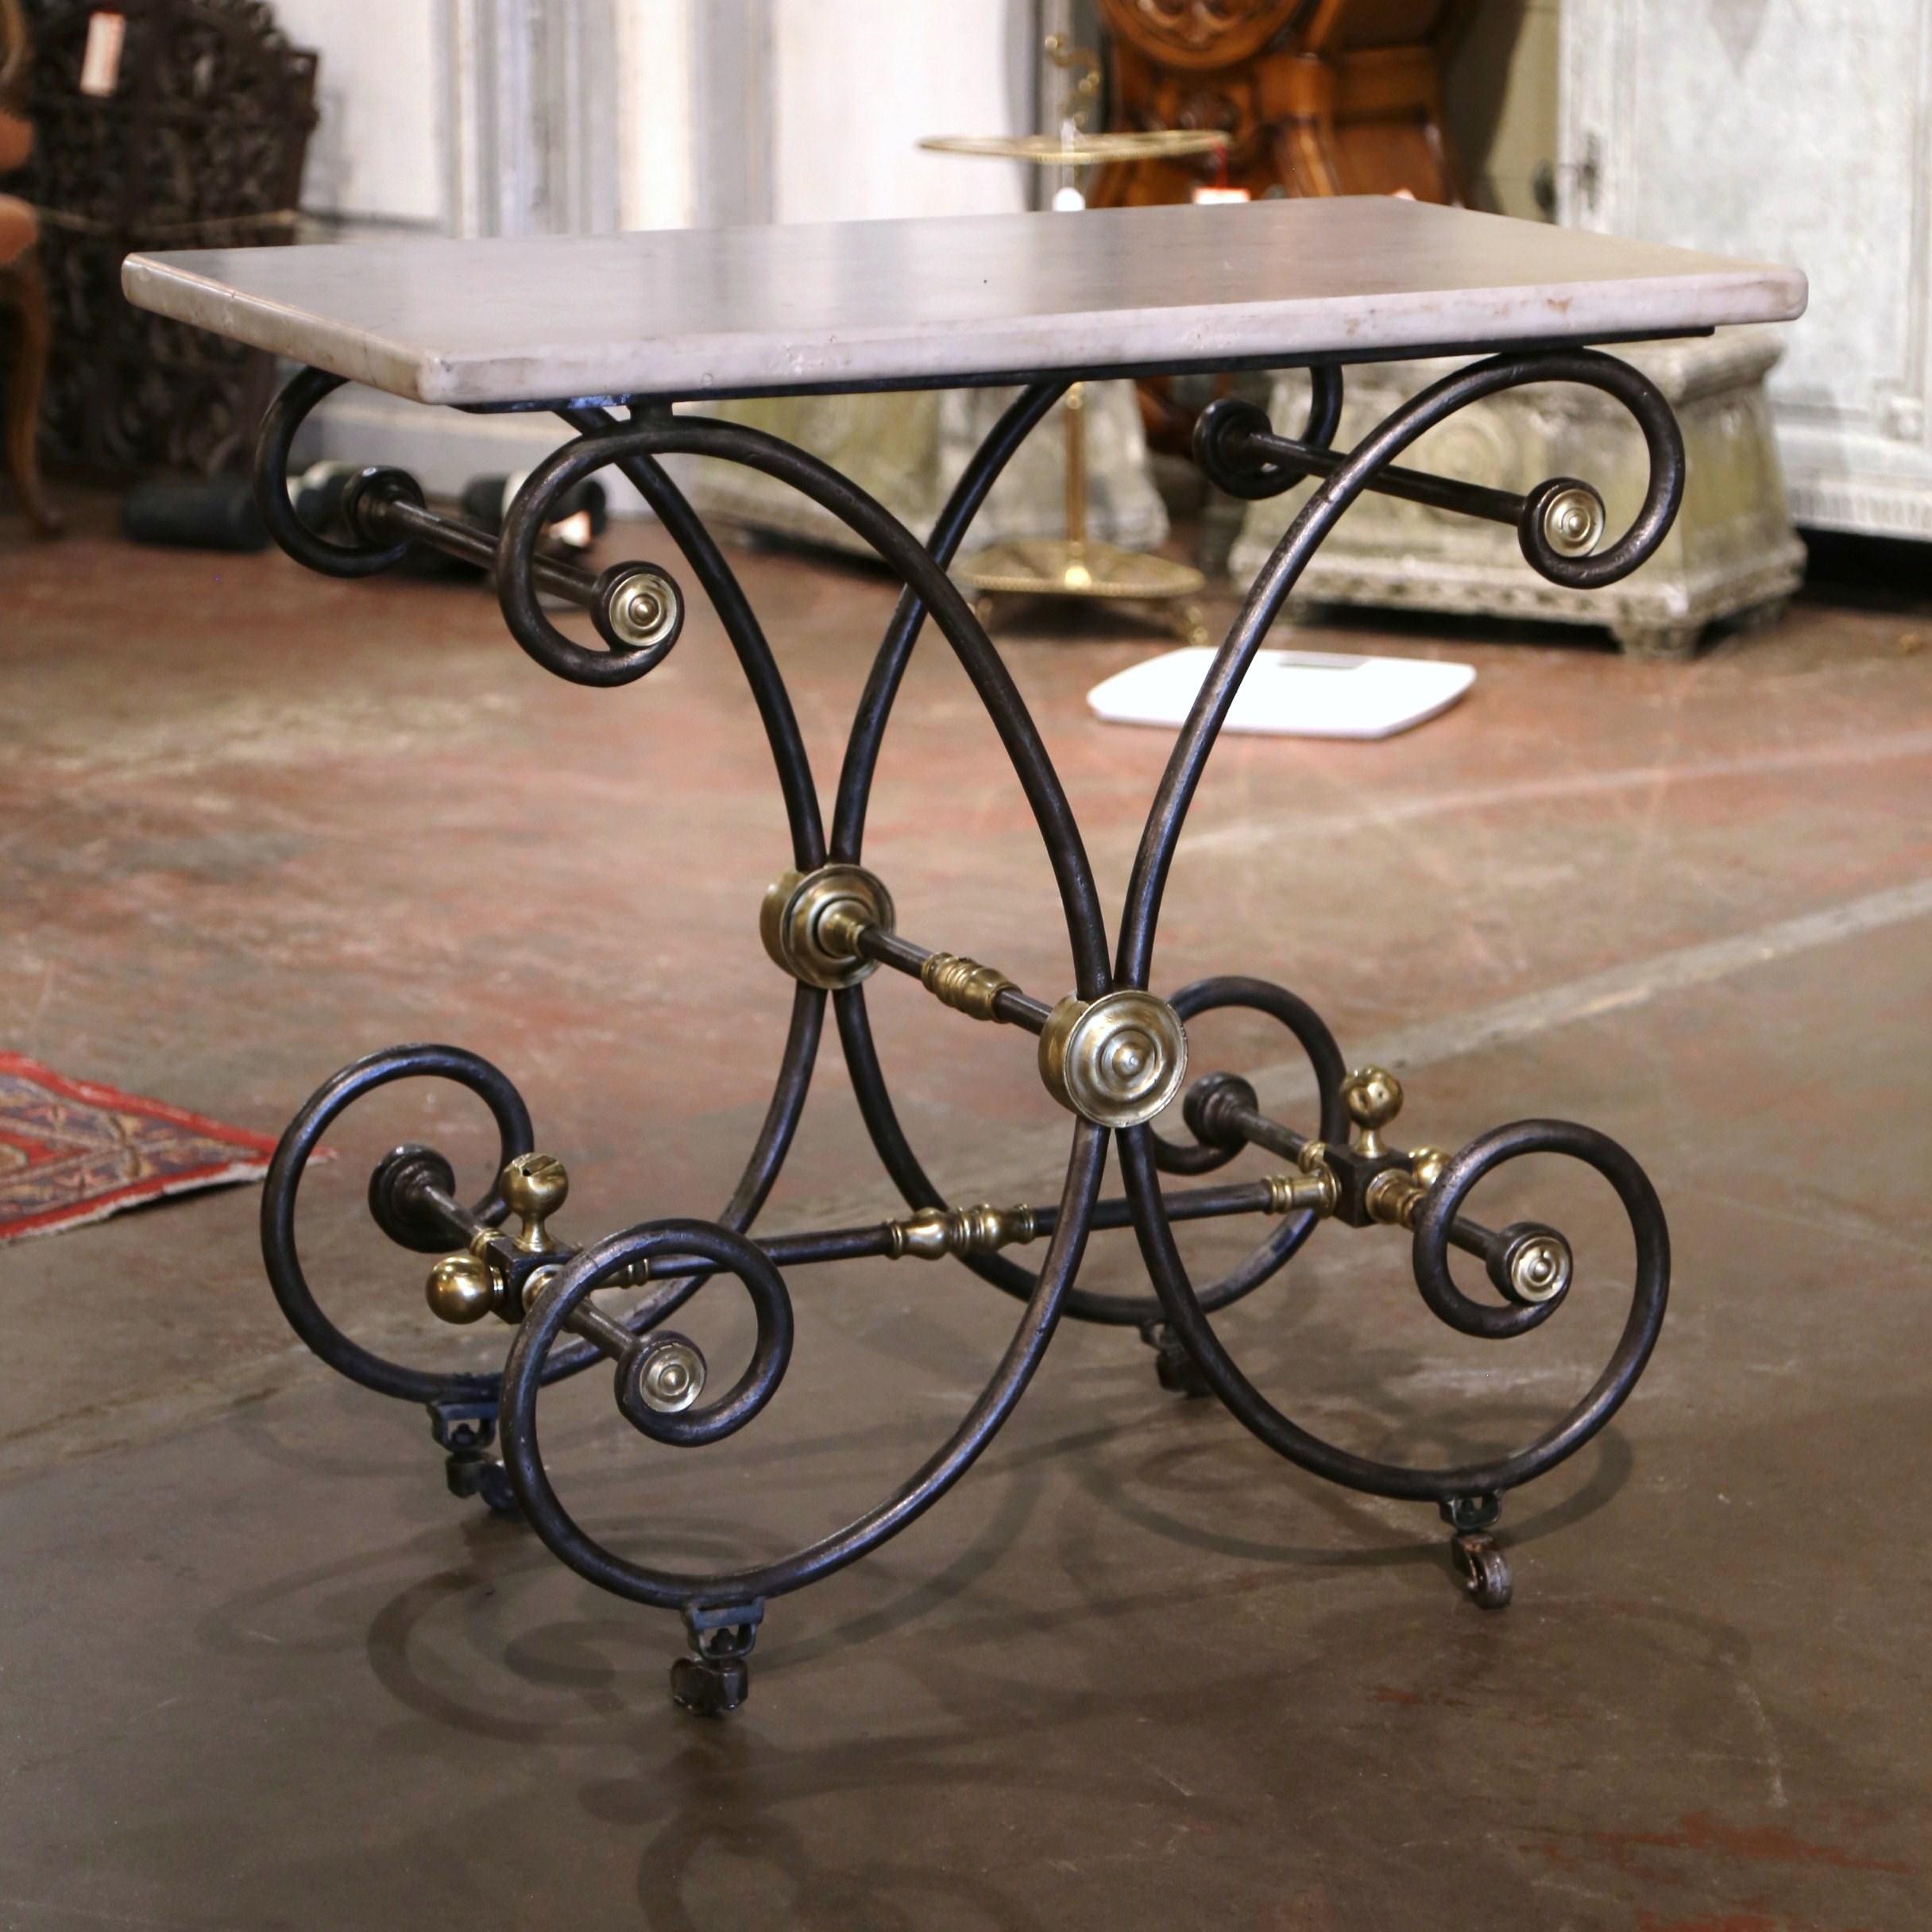 Rectangular in shape, the petite antique butcher table (or pastry table) would add the ideal amount of surface space to any kitchen. Crafted in France circa 1860, the table features intricate metal work and beautiful scrolled legs, decorated with